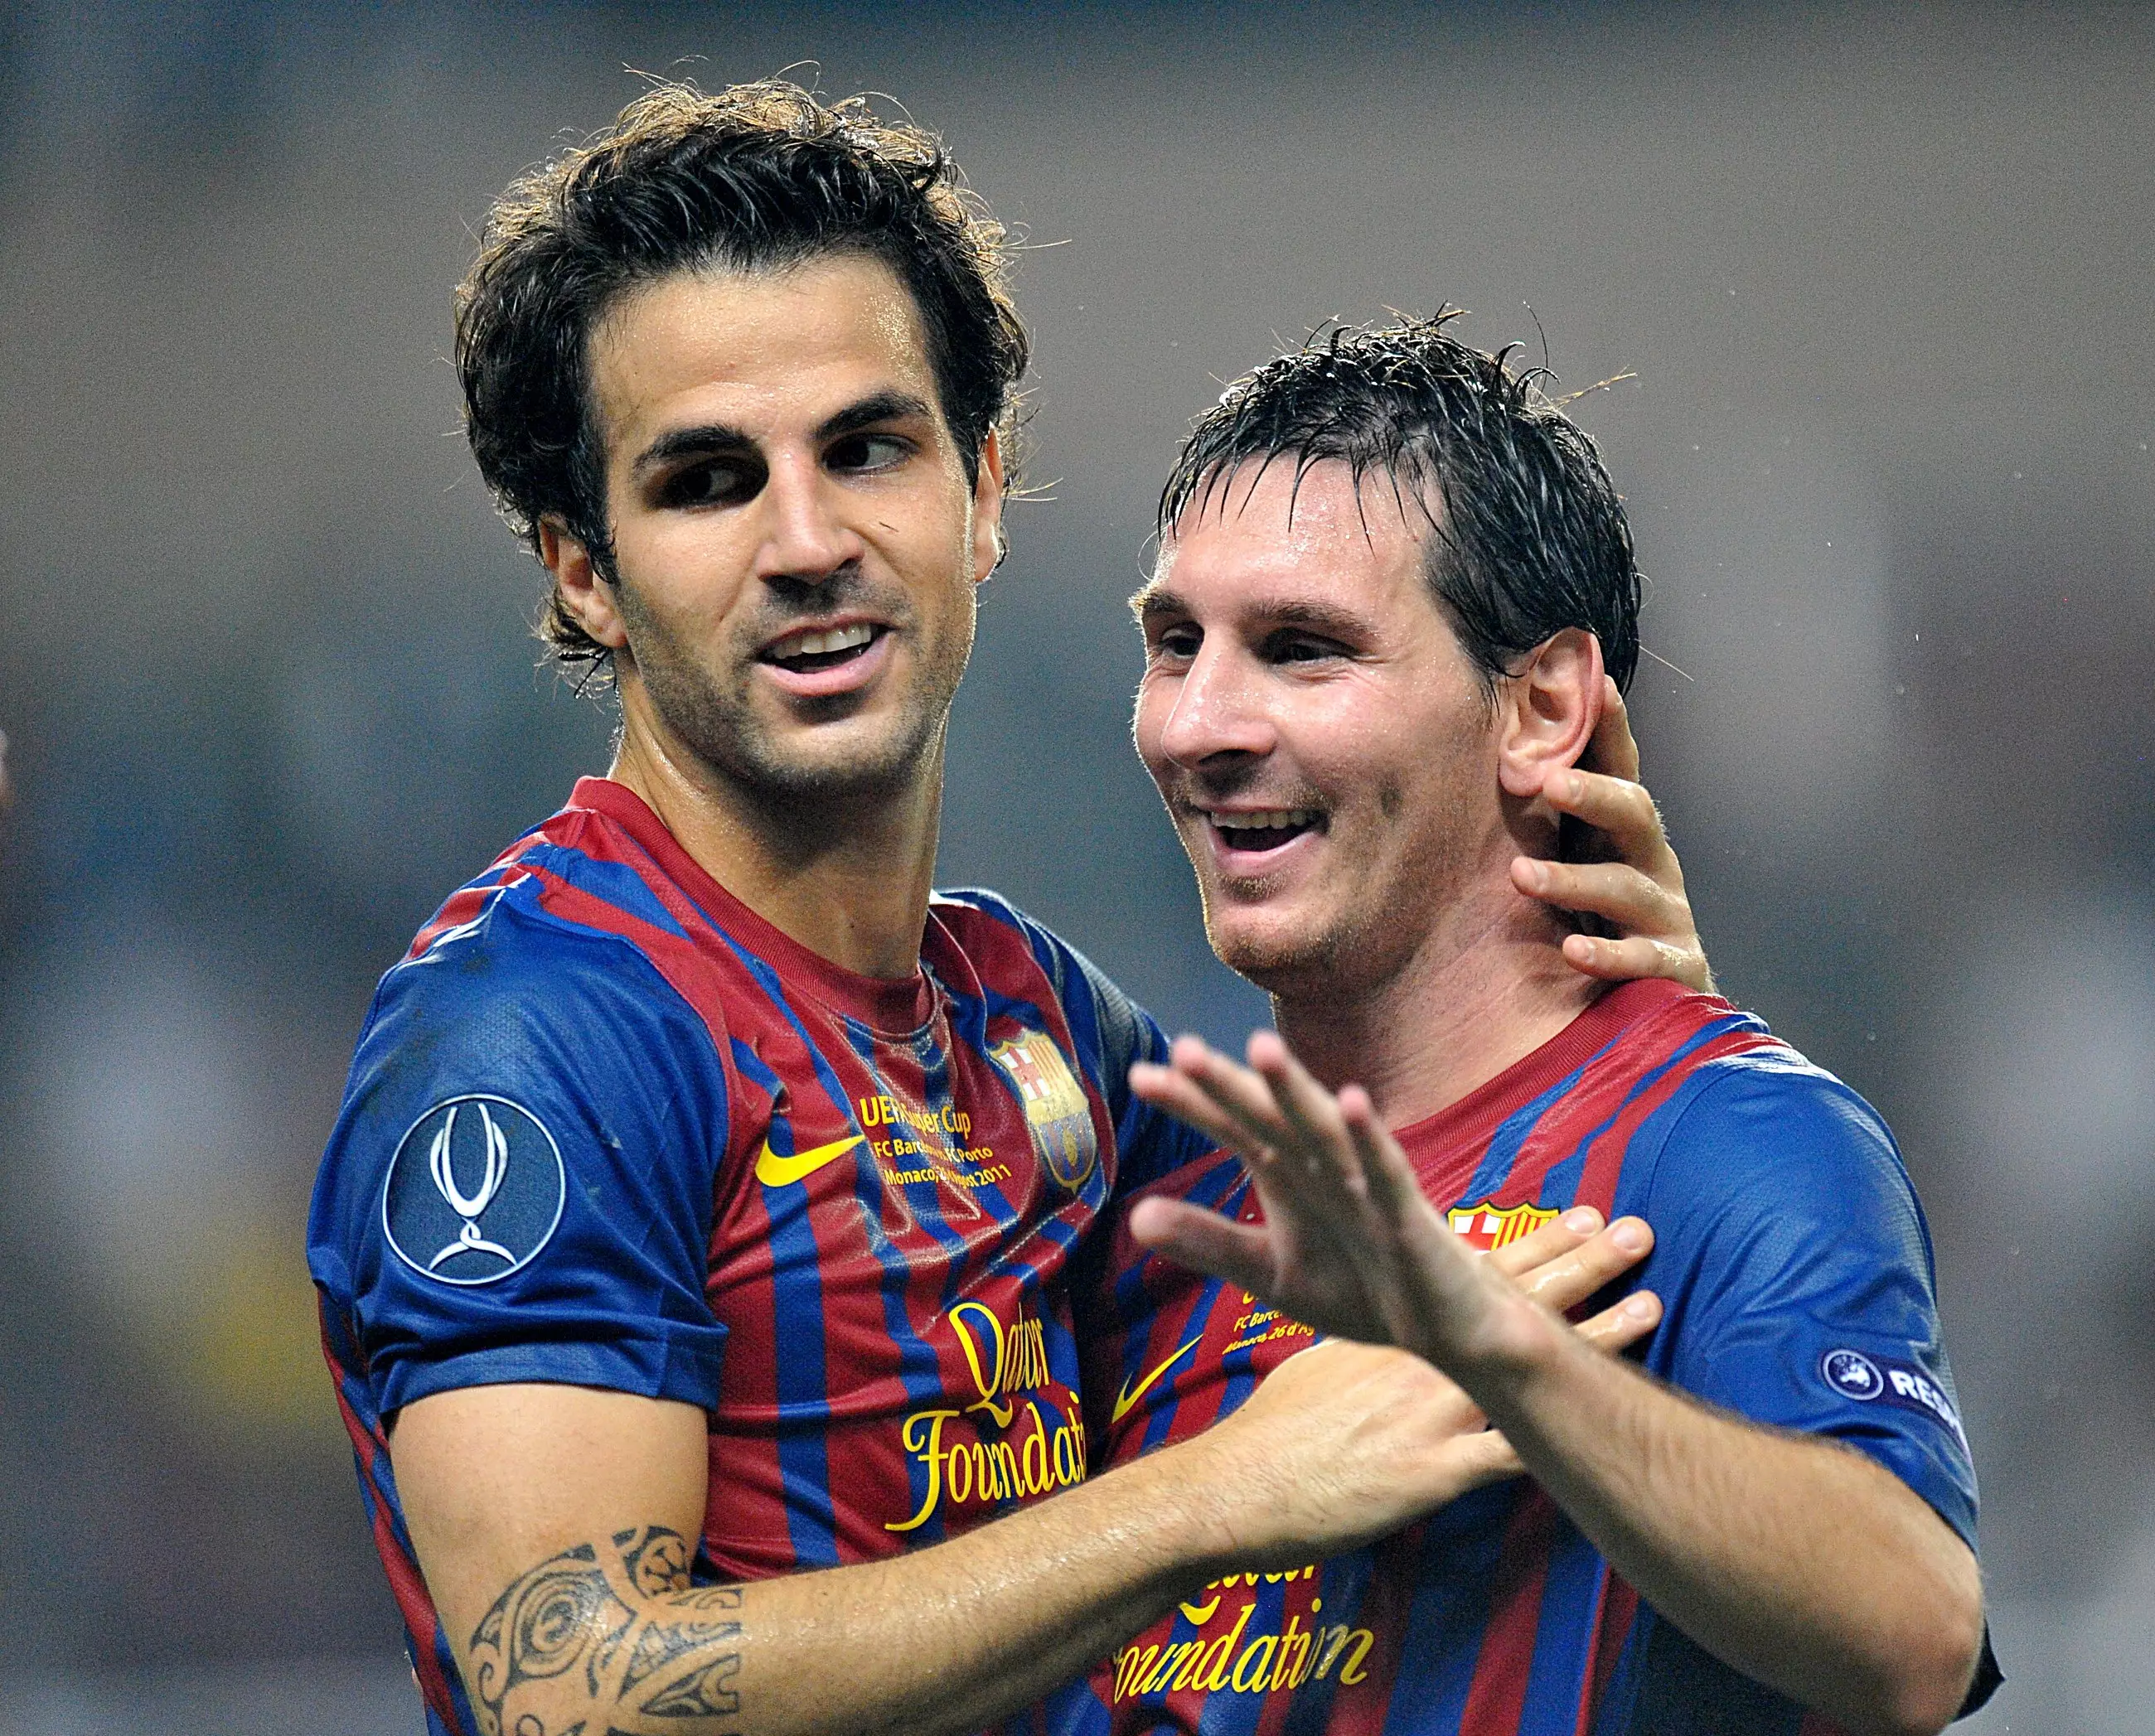 The pair have played together at Barca and against each other. Image: PA Images